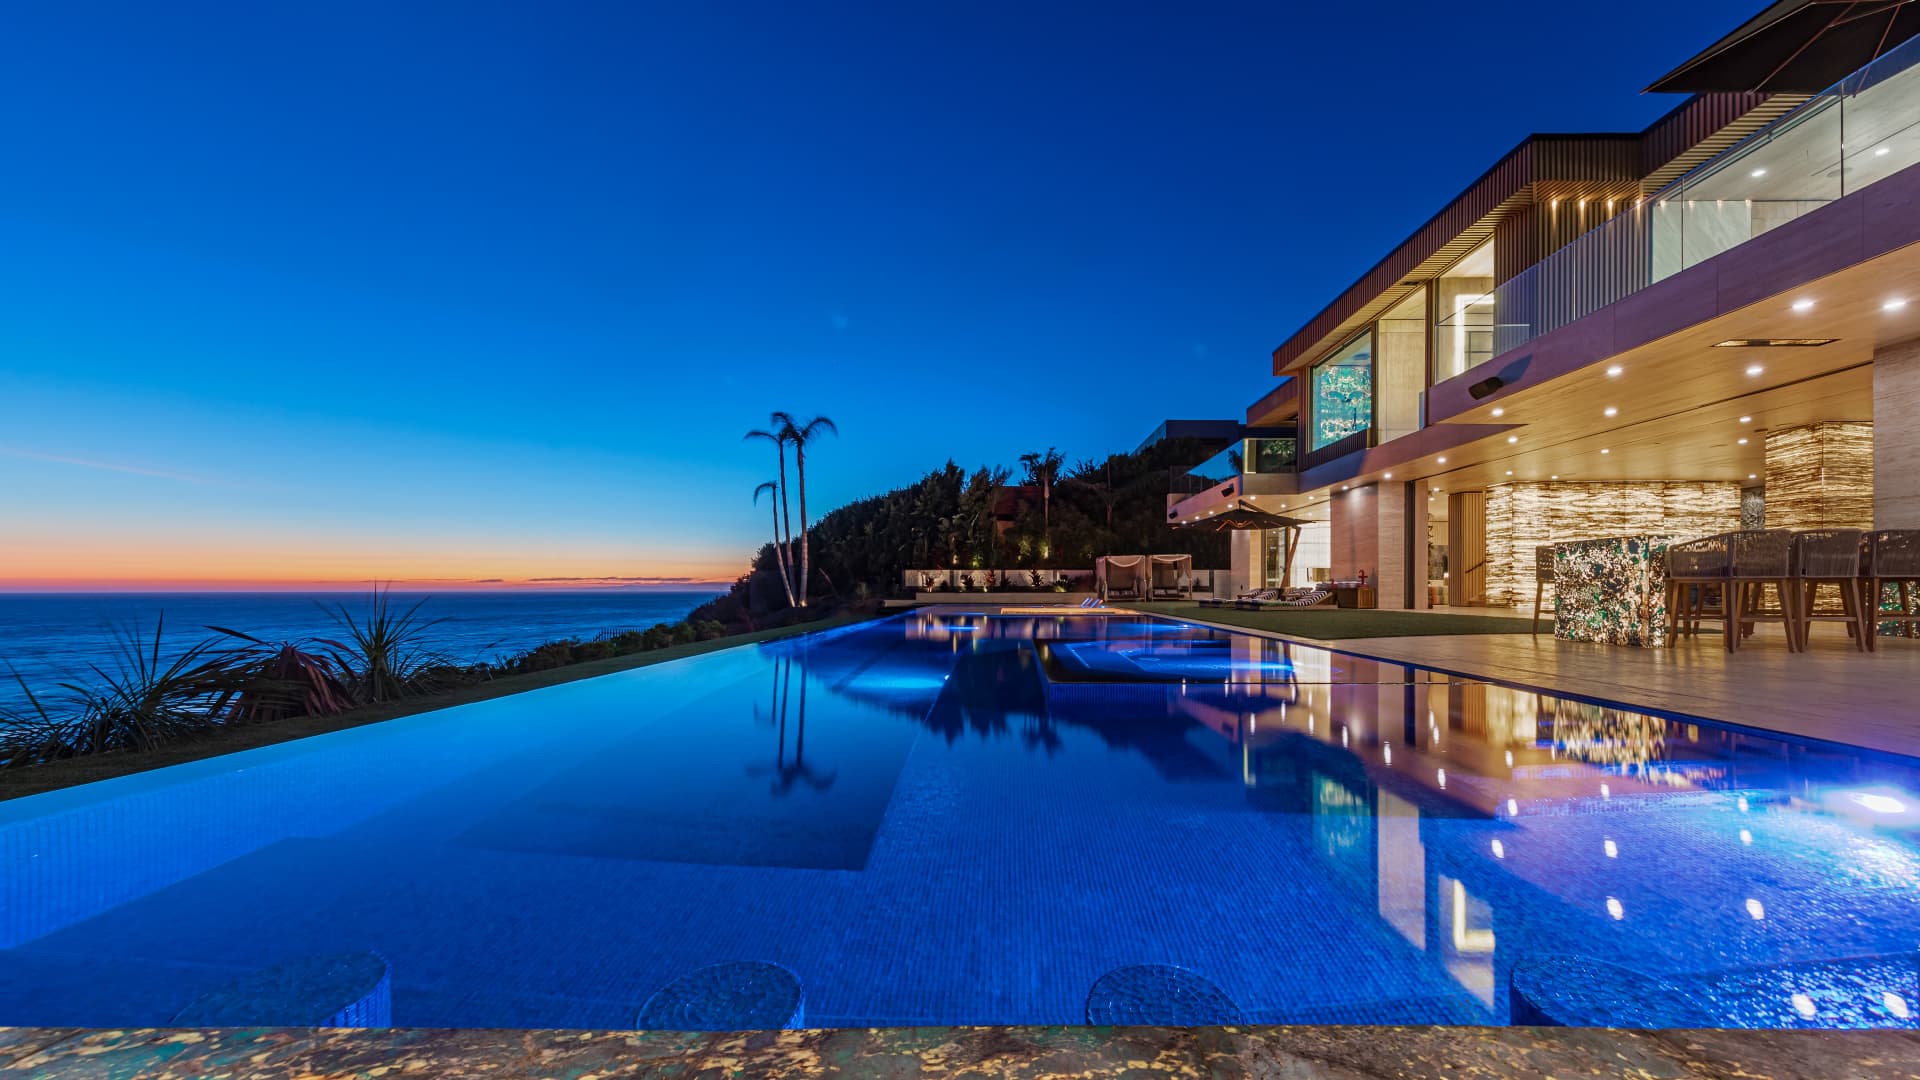 The mansion at 11870 Ellice St sits above the Pacific Coast Hwy in Malibu overlooking the ocean.